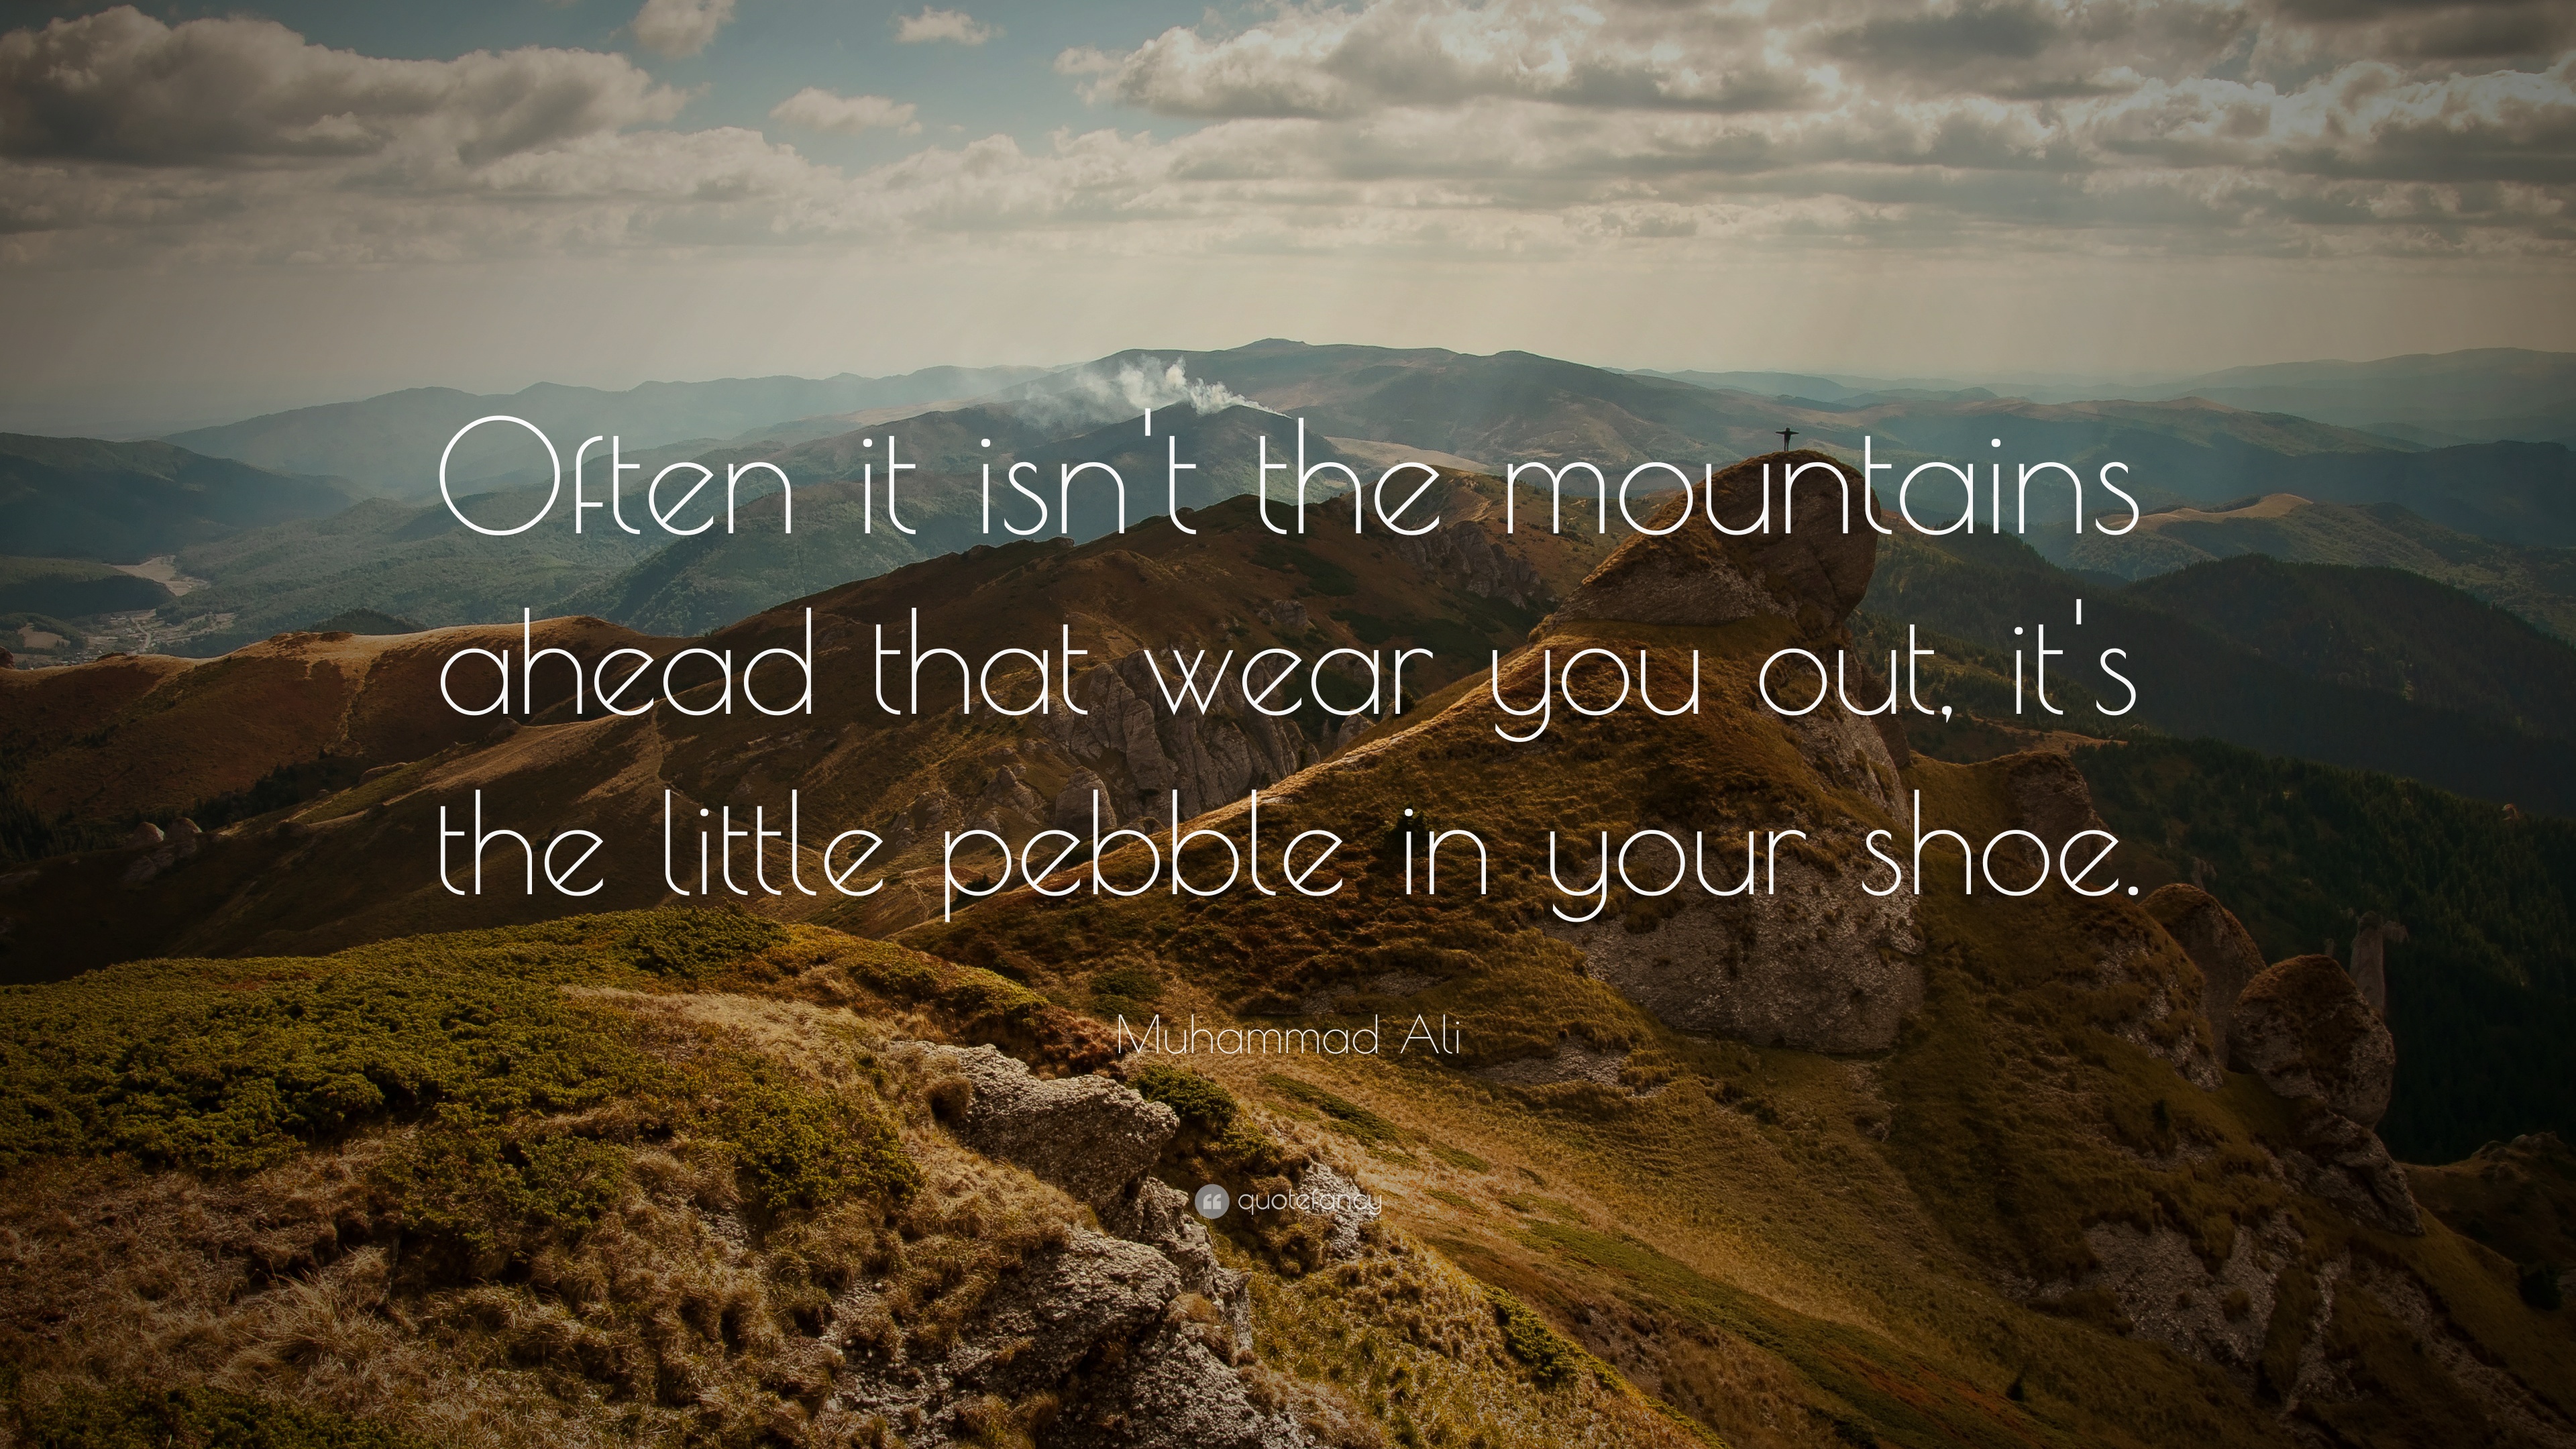 Muhammad Ali Quote: “Often it isn't the mountains ahead that wear ...